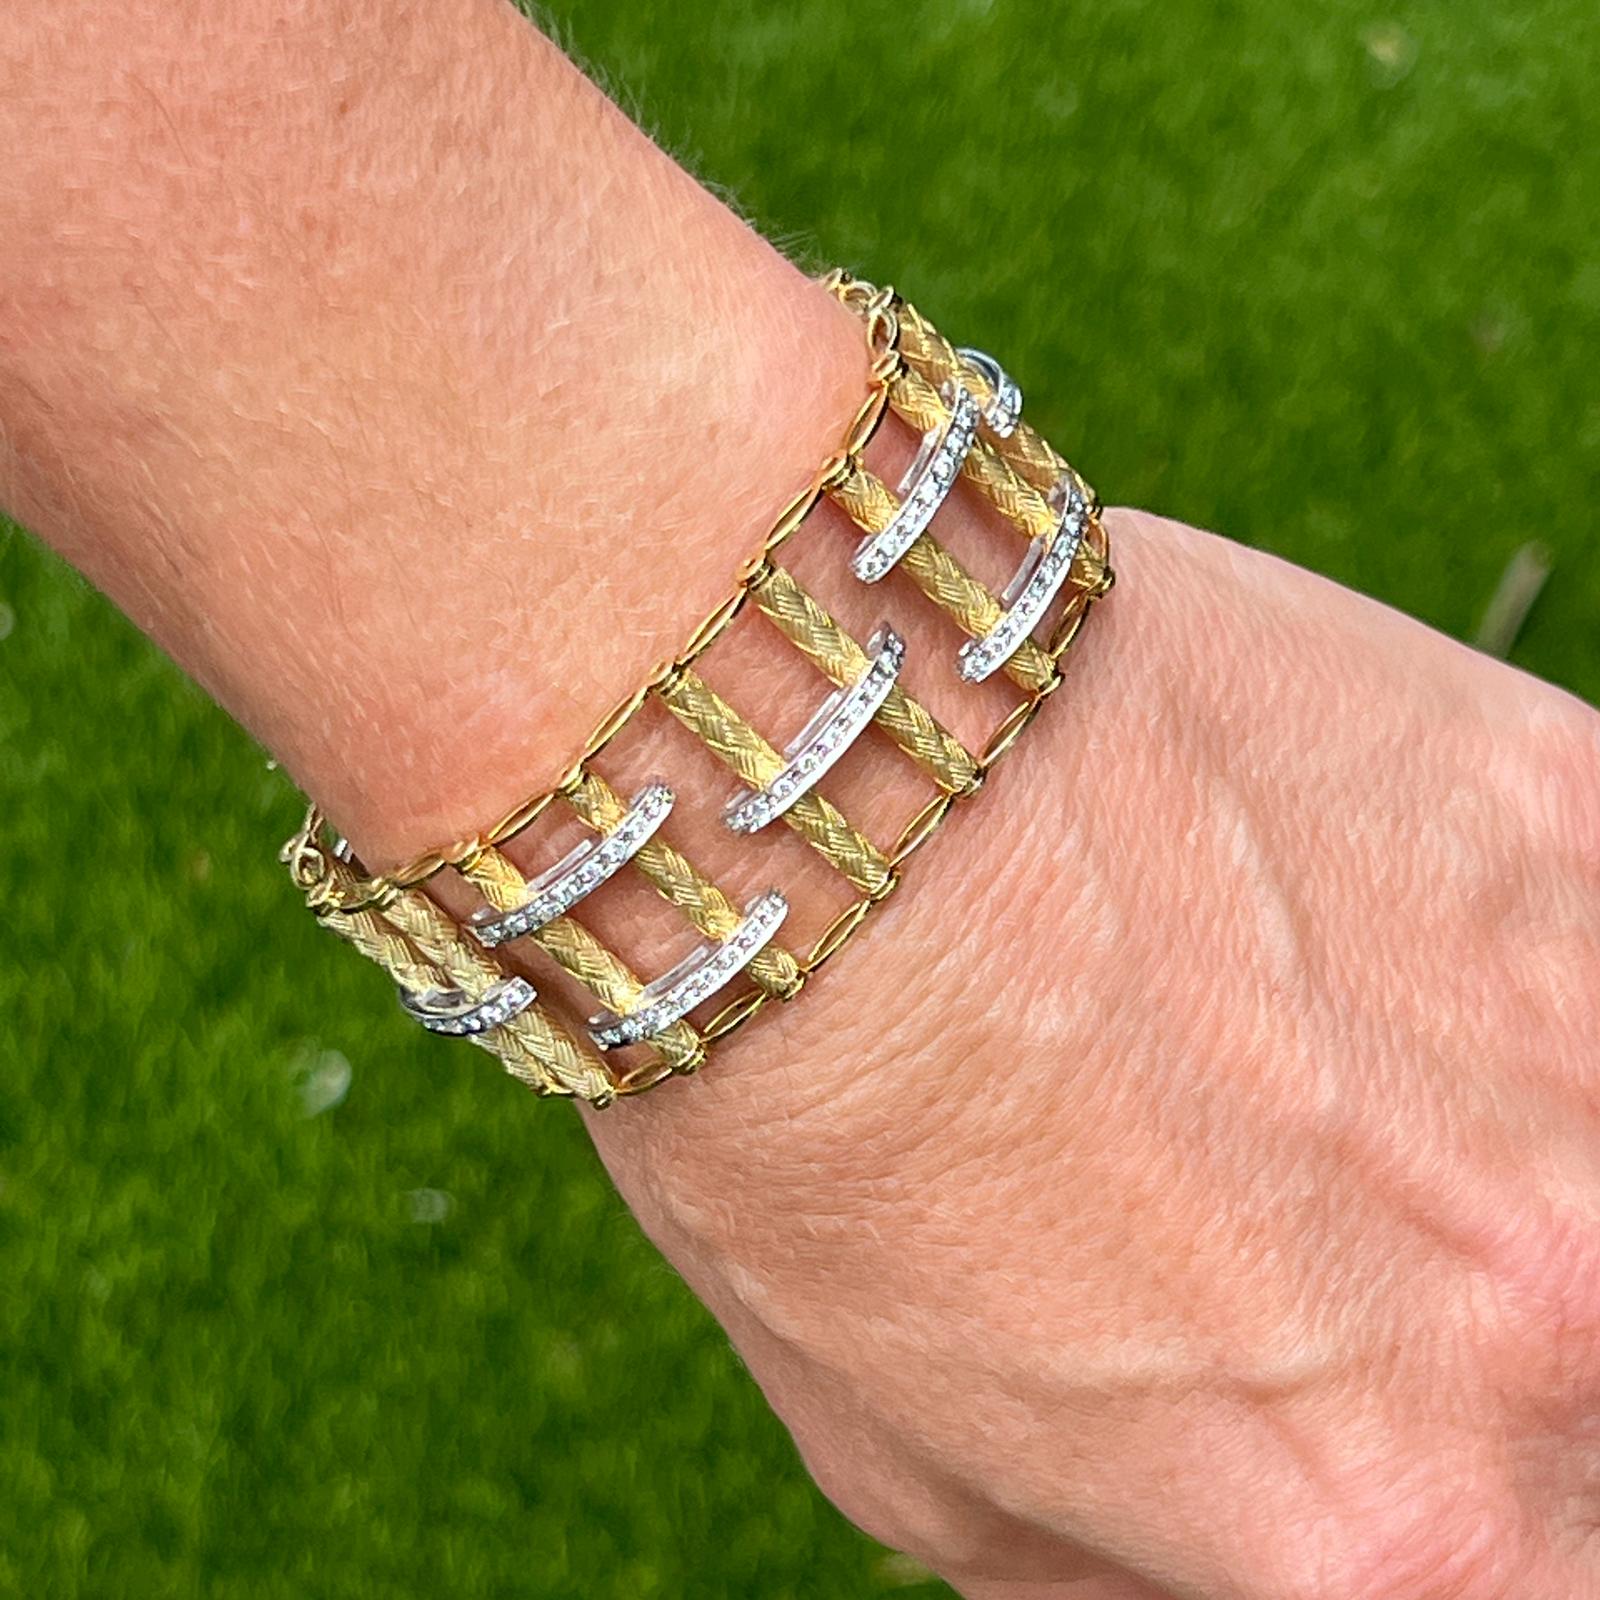 Modern Italian beautifully crafted diamond ladder style link bracelet fashioned in 18 karat yellow and white gold. The bracelet features 108 round brilliant cut diamonds set in white gold weighing approximately 1.60 carat total weight. The diamonds